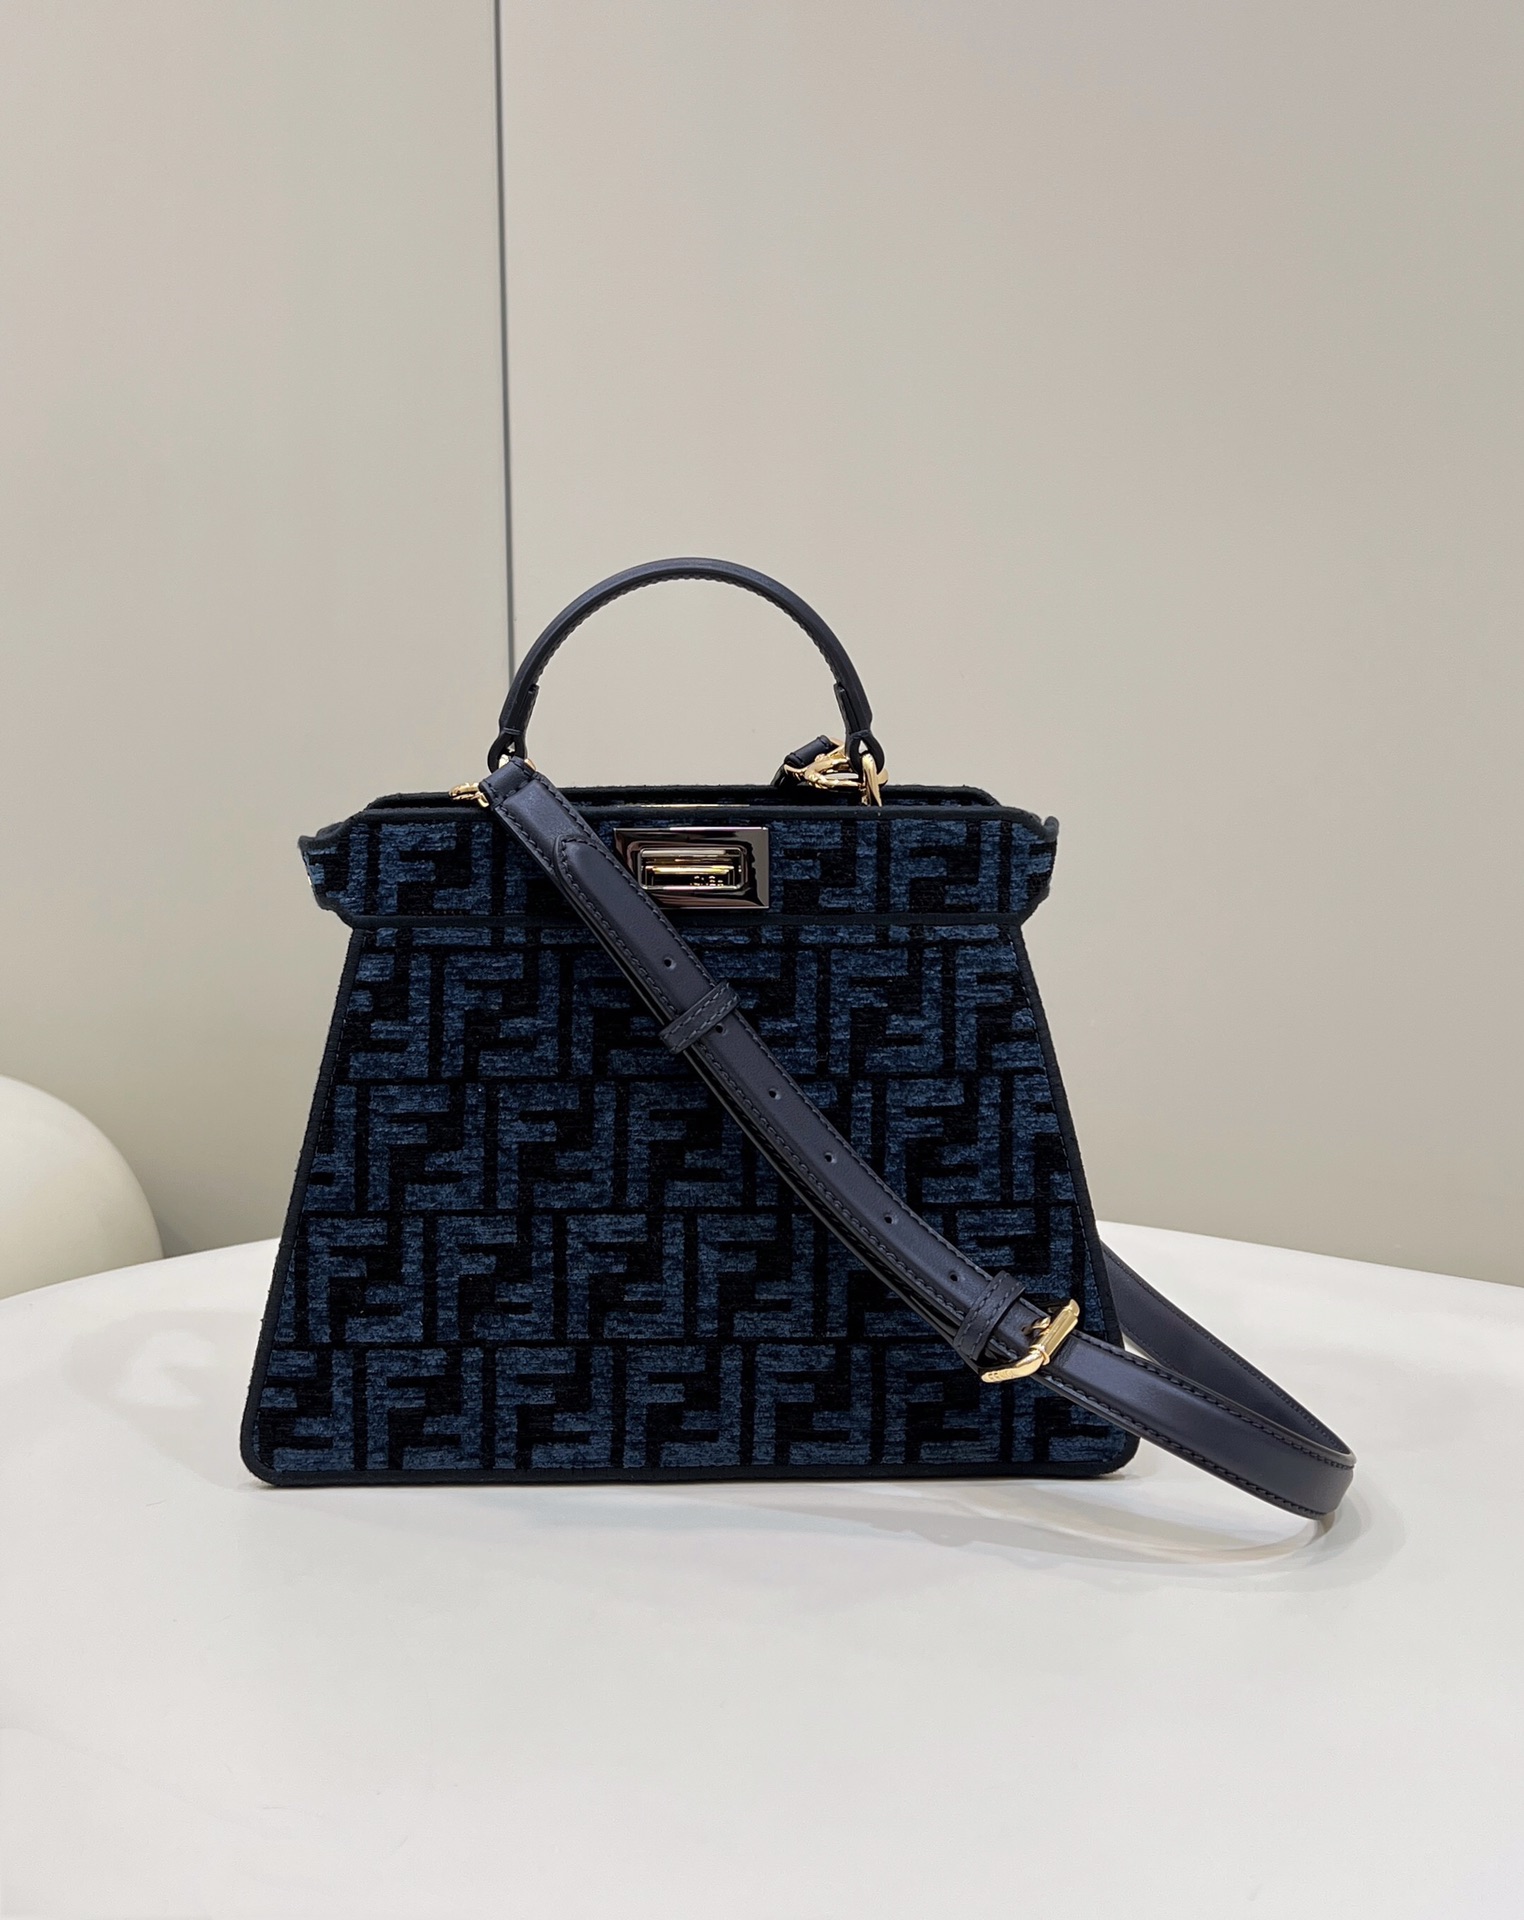 The BEST Fendi Counter Quality Replica Available Online!